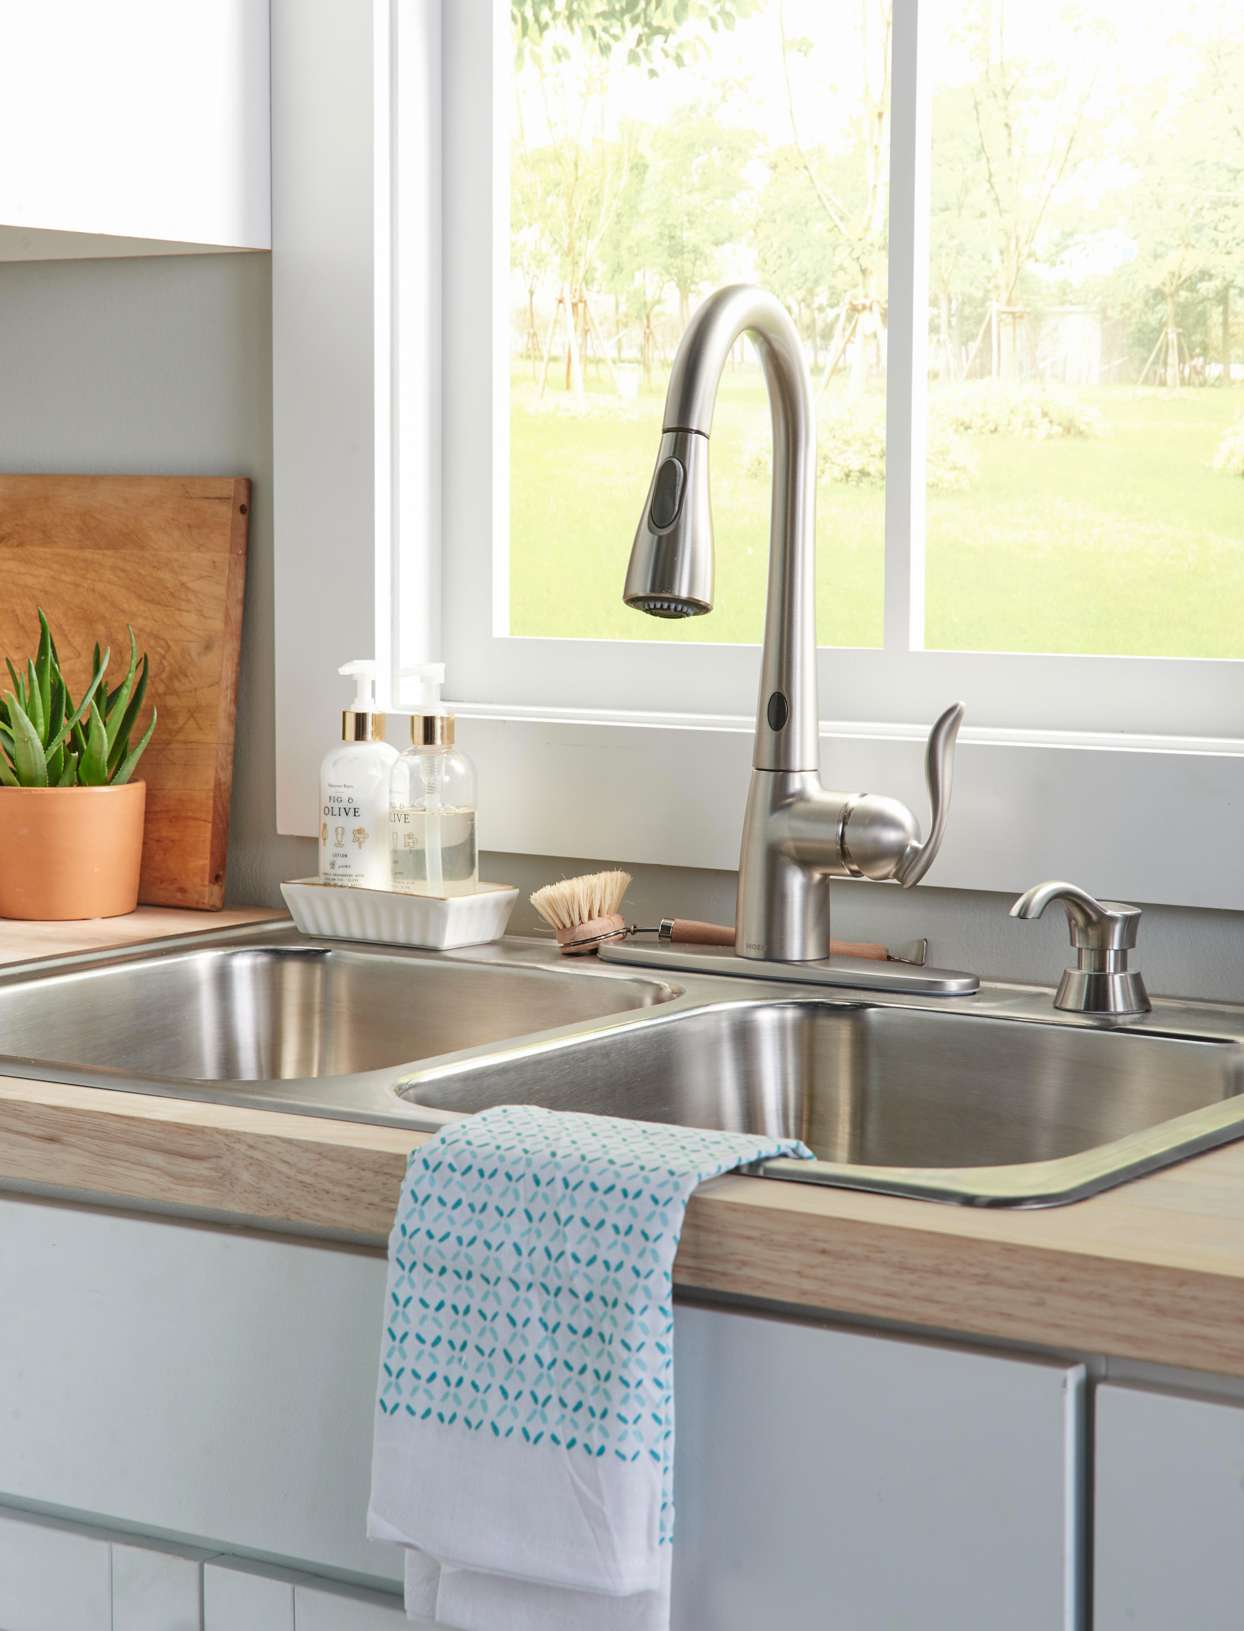 updated modern kitchen faucet sink with window